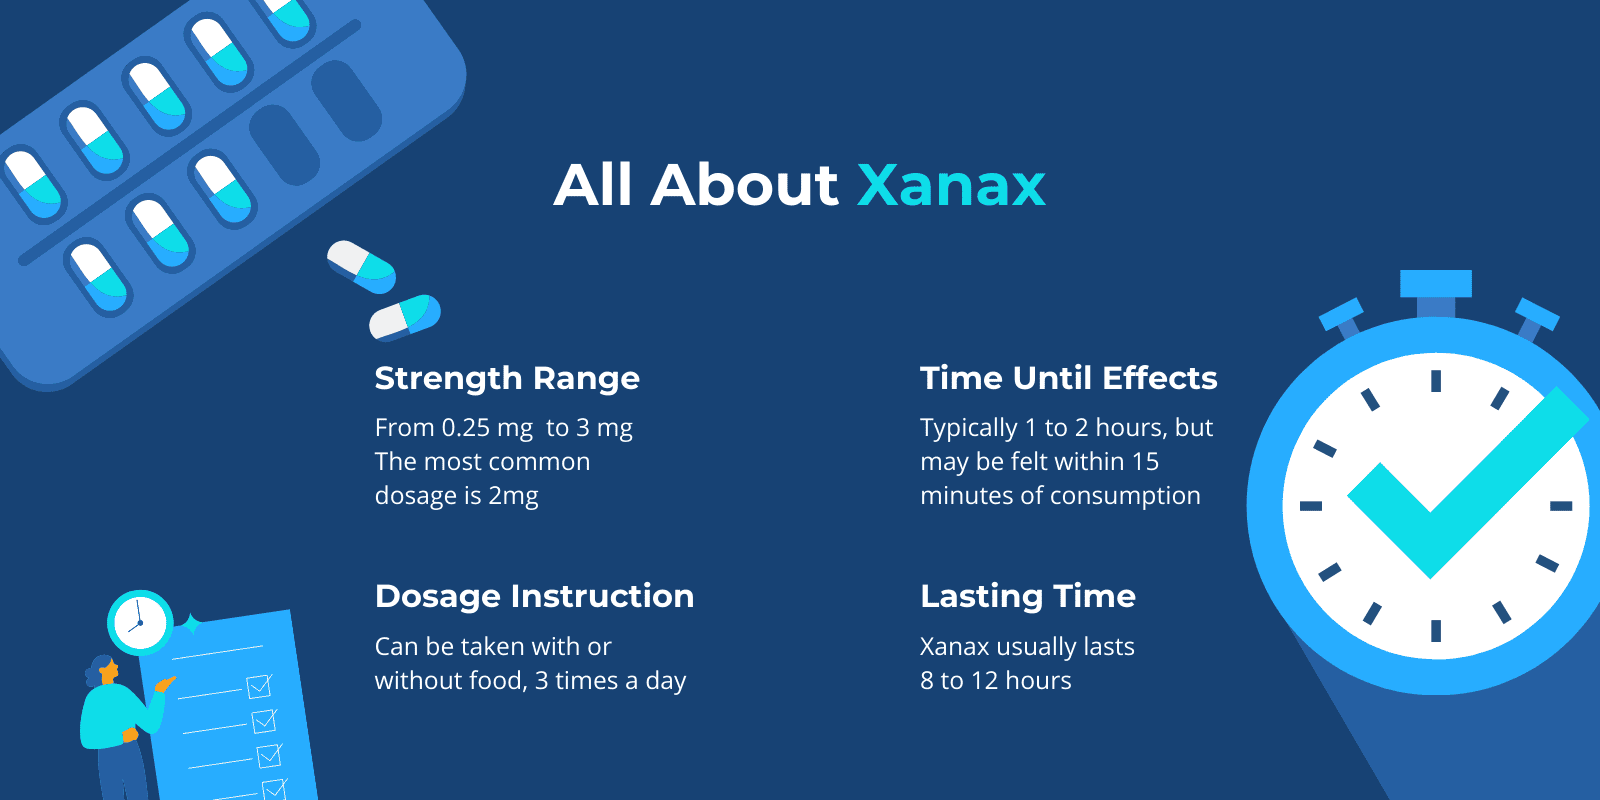 All about Xanax dosage from strength, instruction, time until effects, and lasting time with relevant illustrations like timer, tablet pills, and checklist with a clock